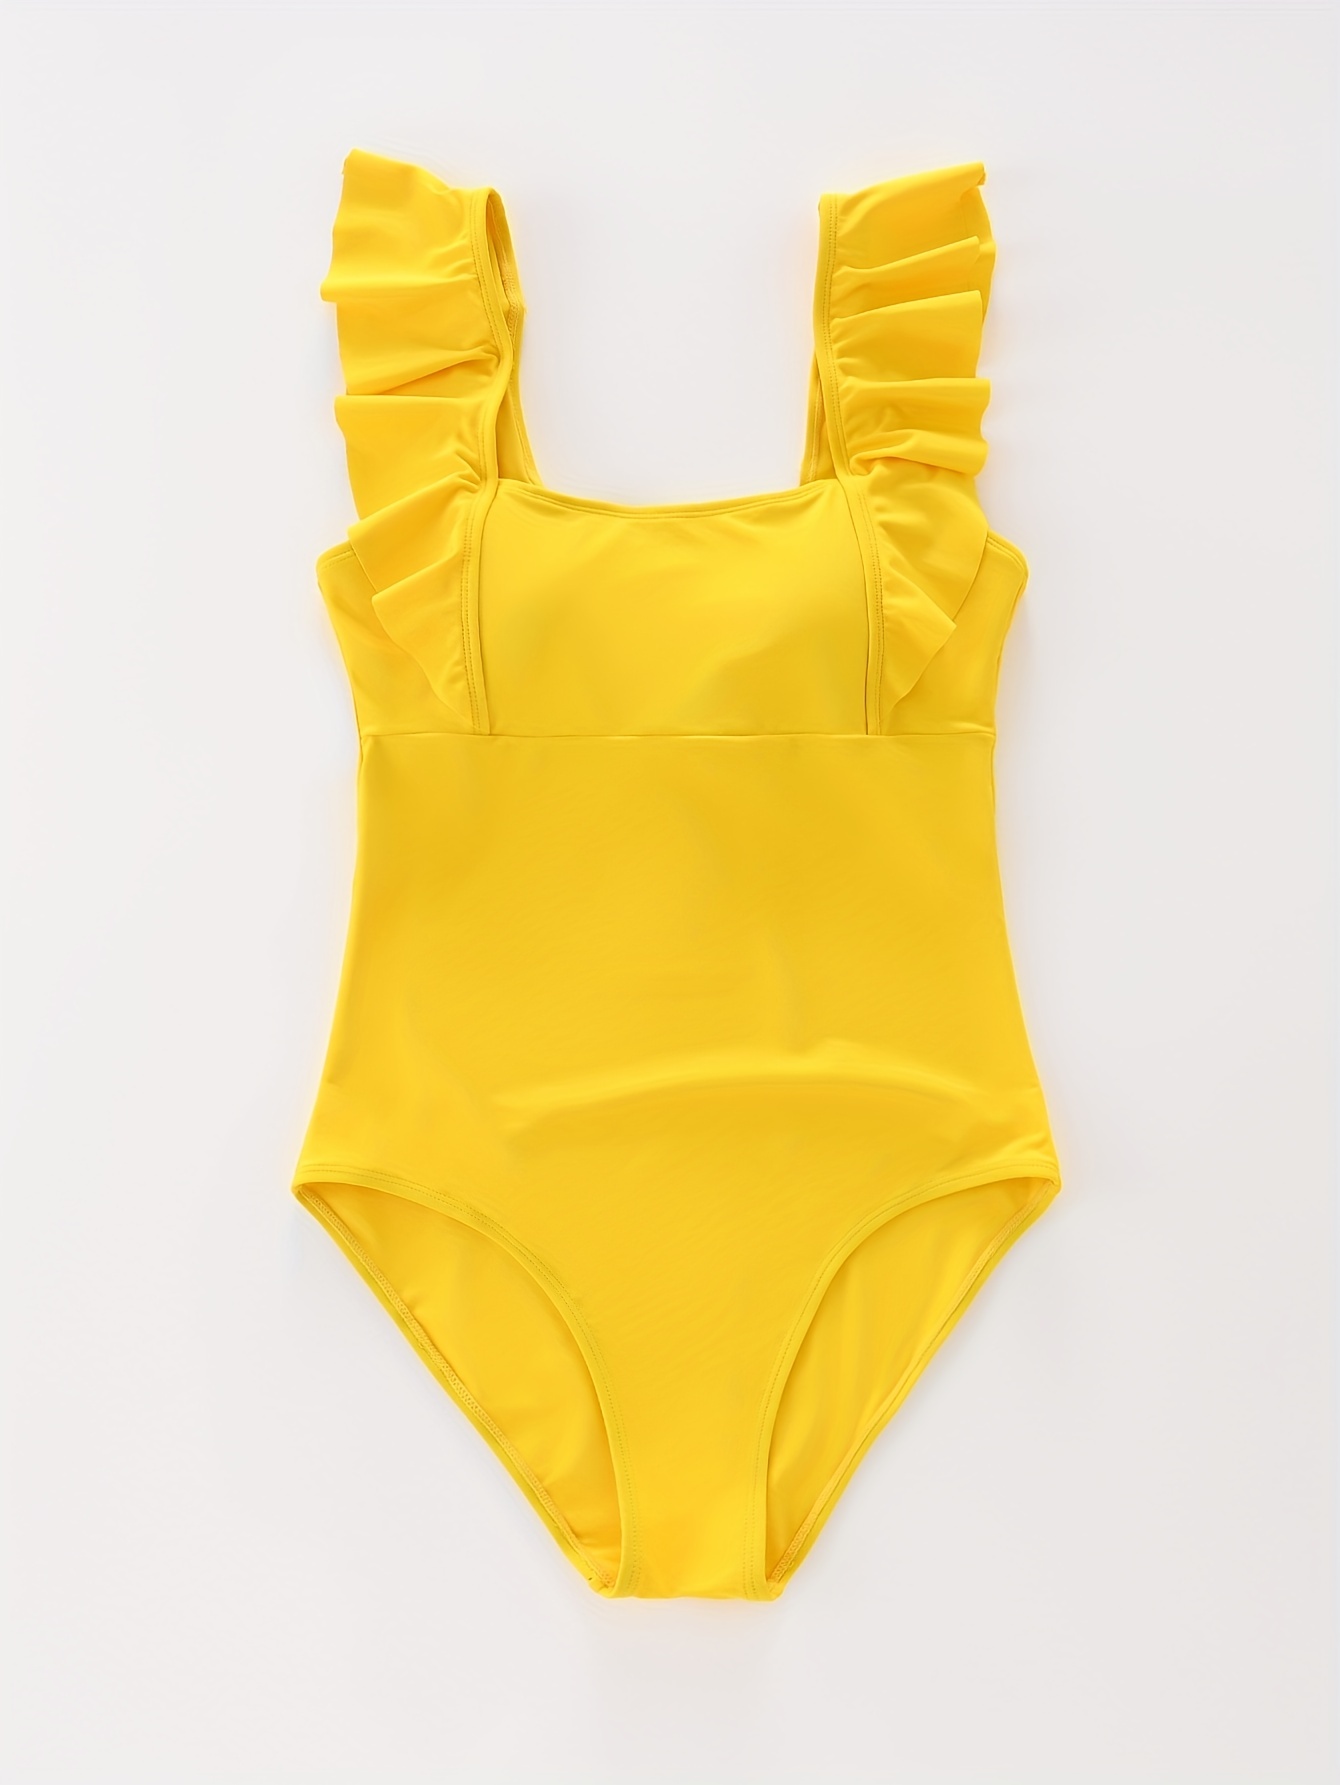 Collared v-neck ribbed bodysuit yellow